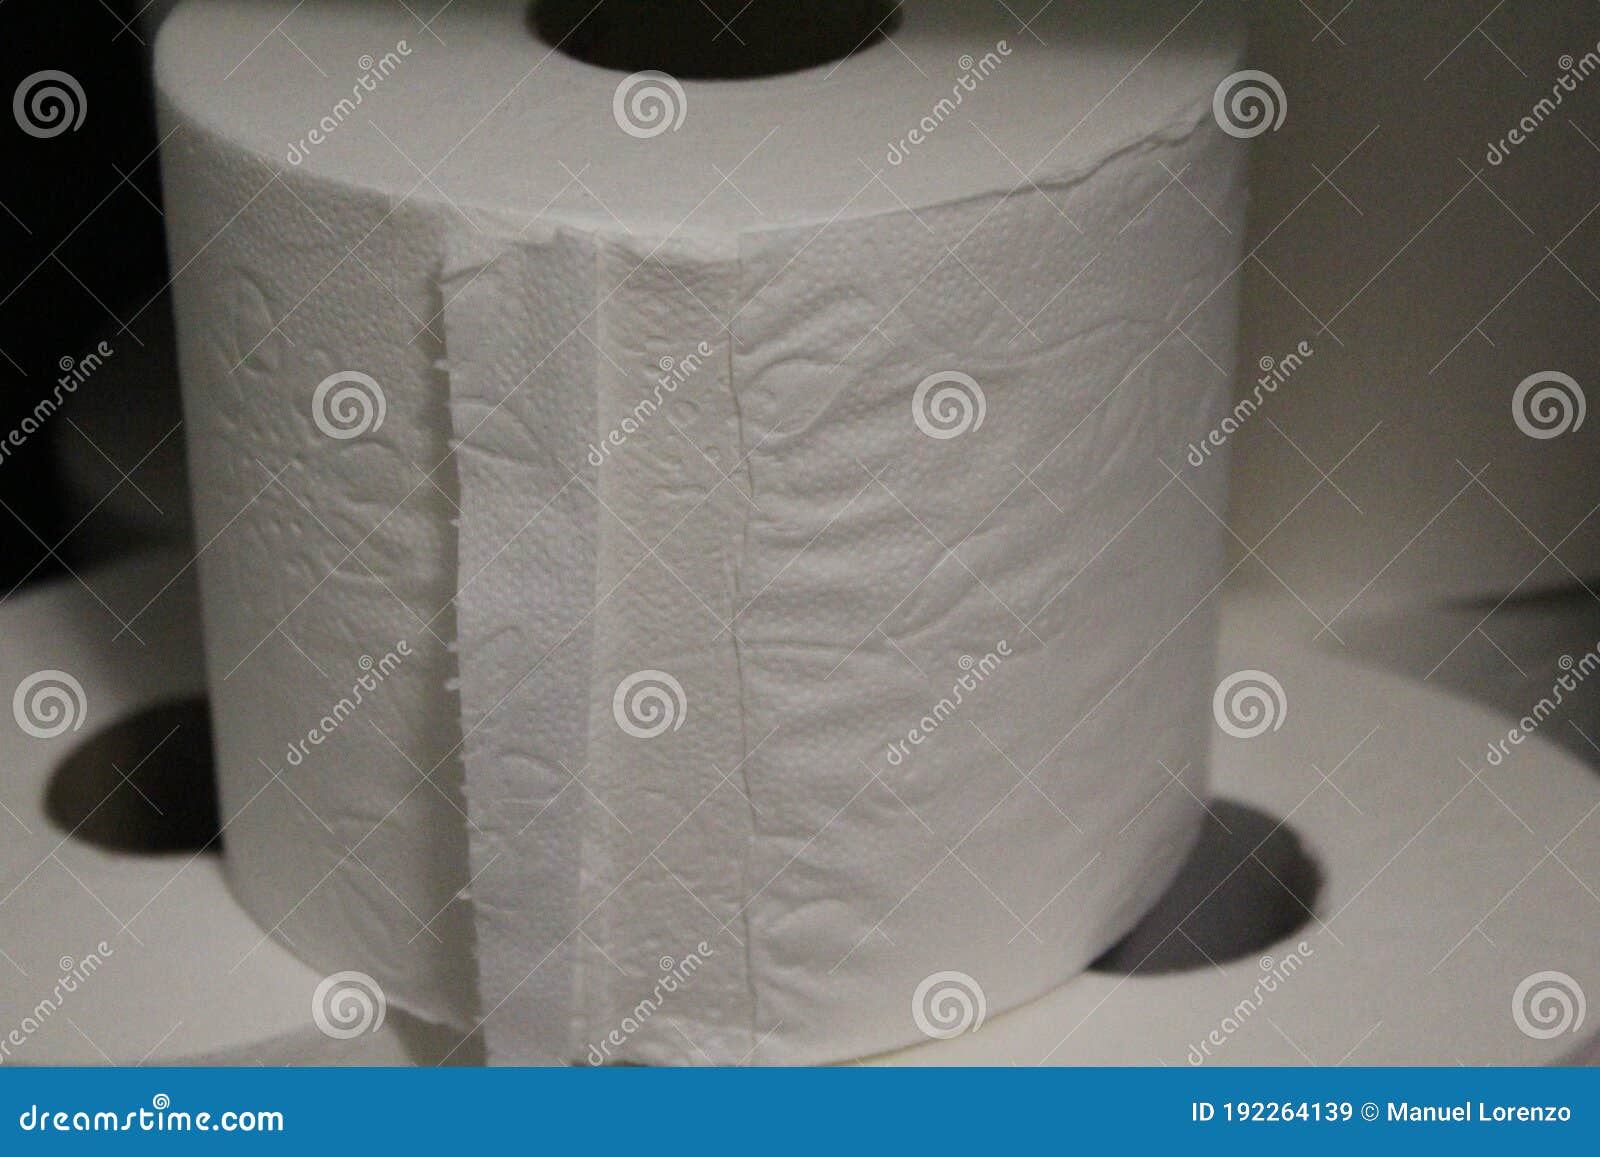 white toilet paper roll ecological cleaning cloth